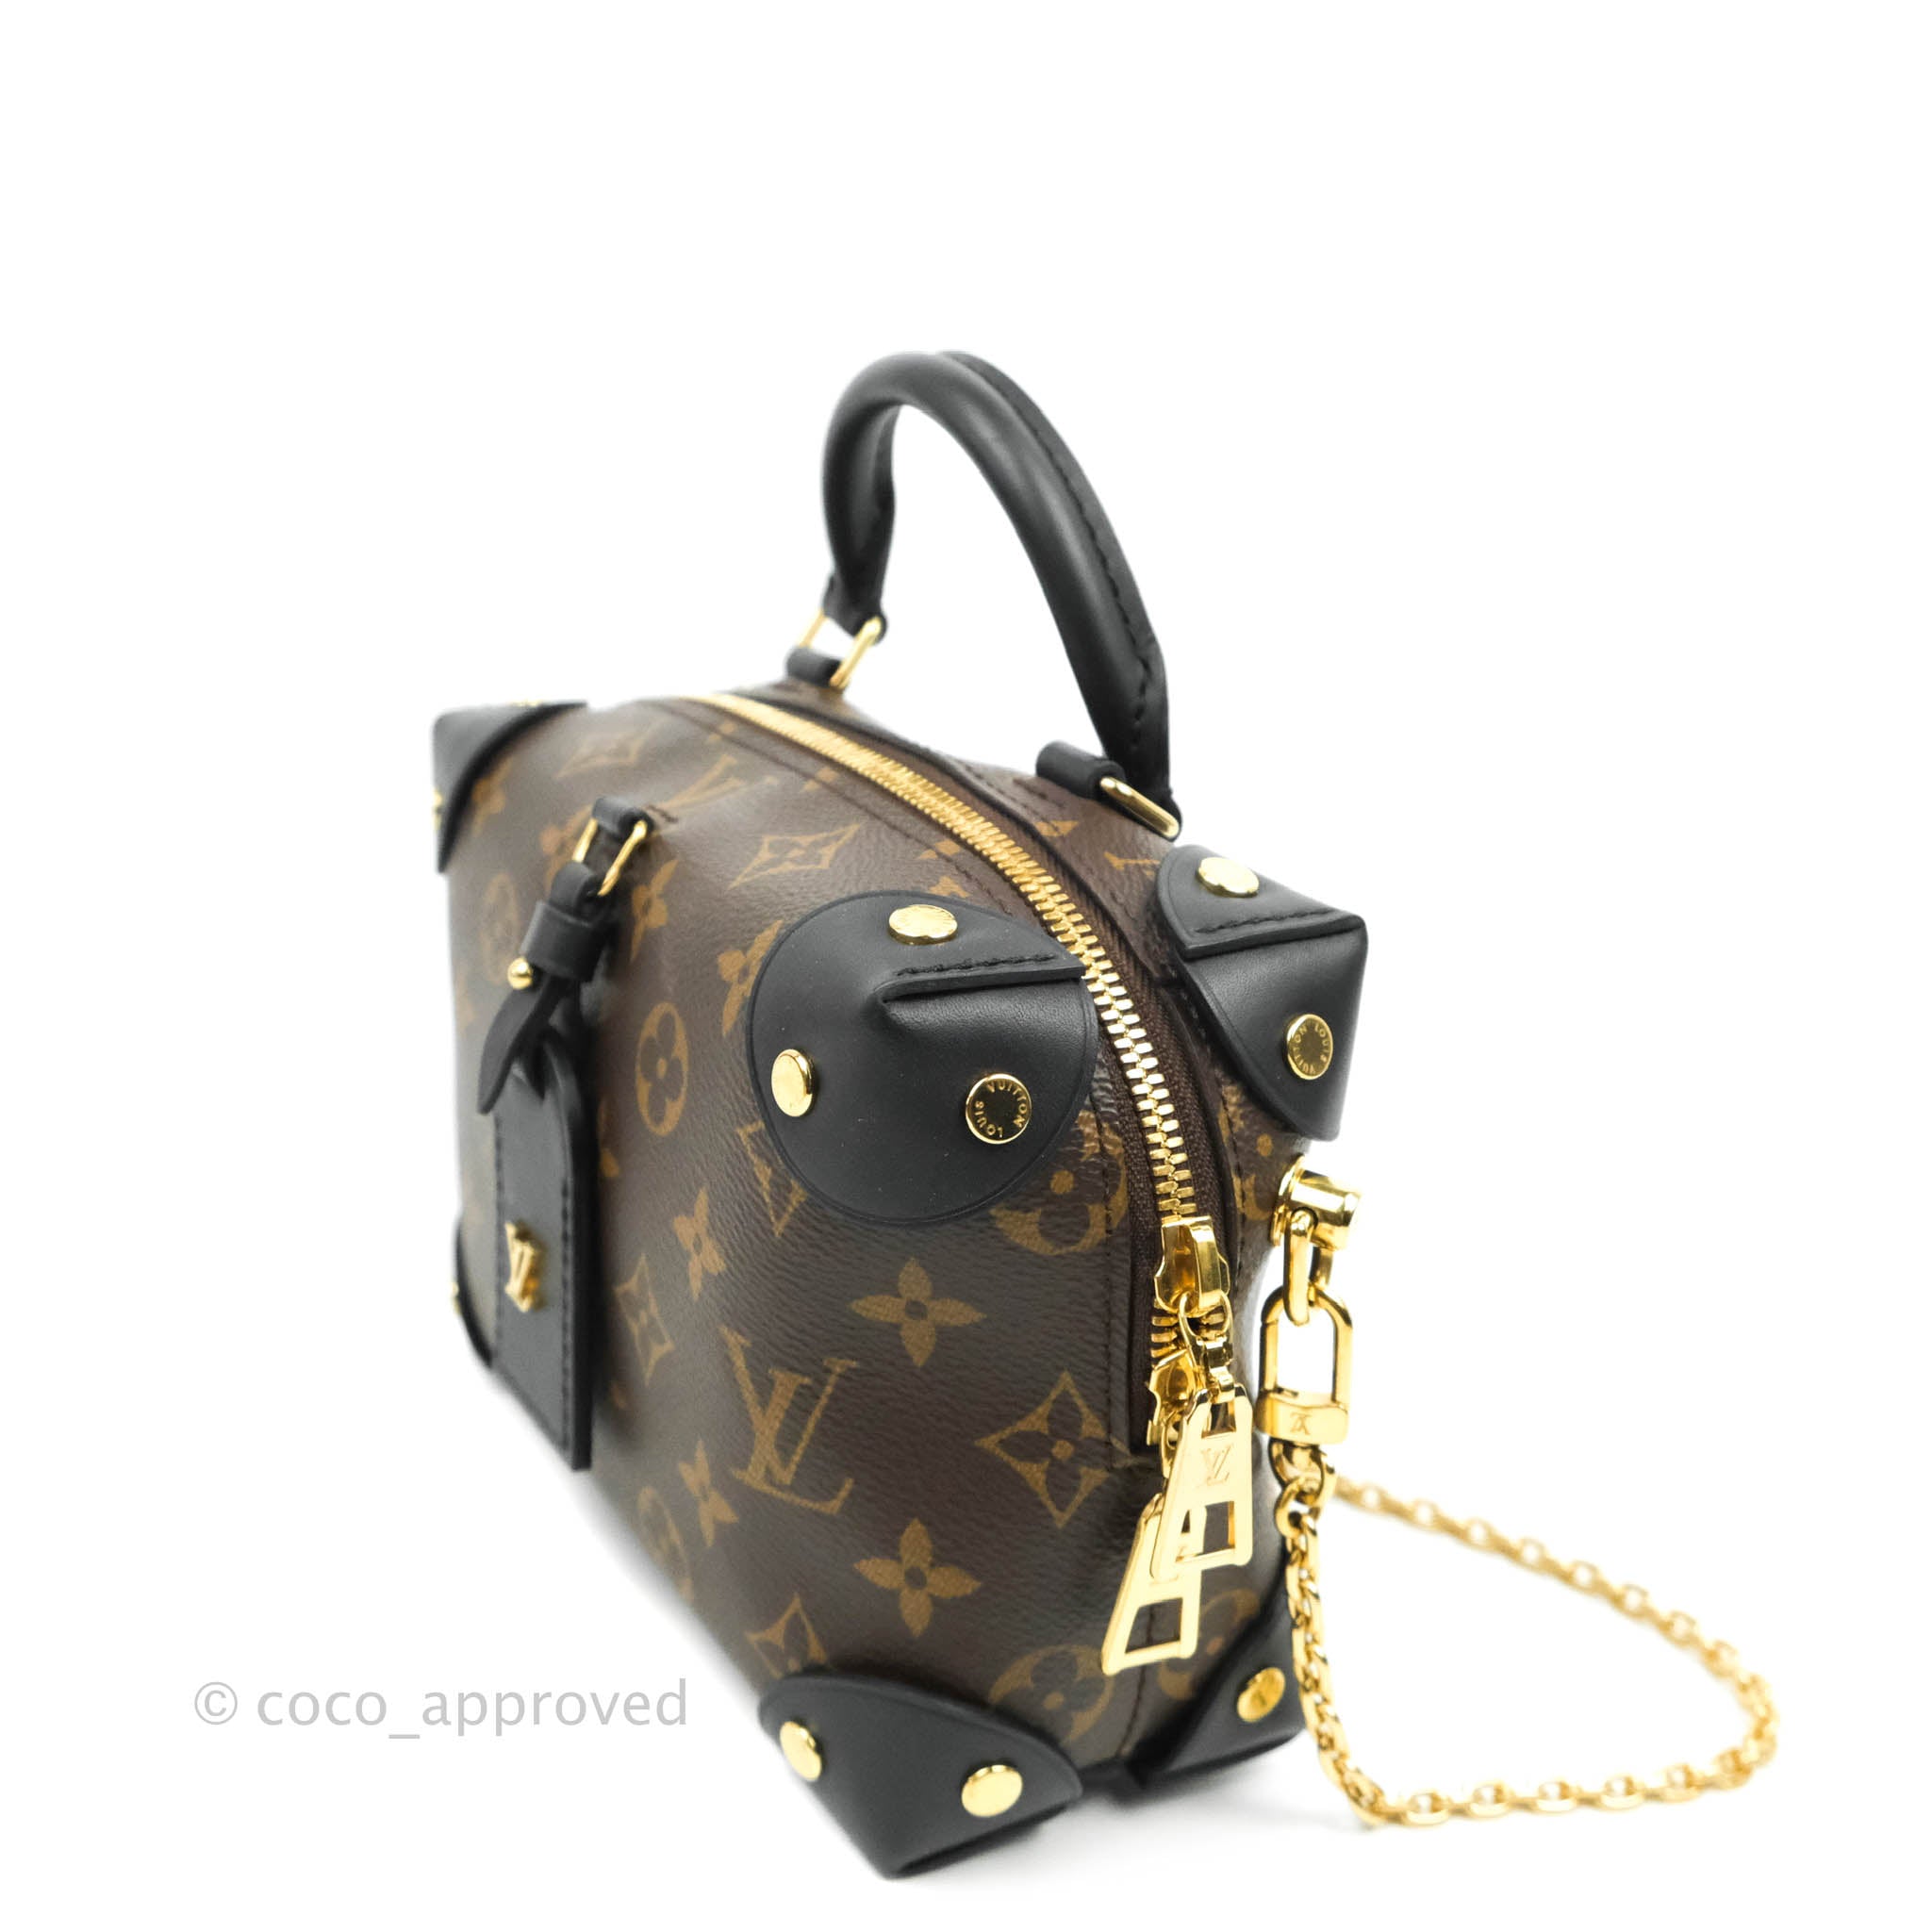 Louis Vuitton Petite Malle Souple Bag Reference Guide - Spotted